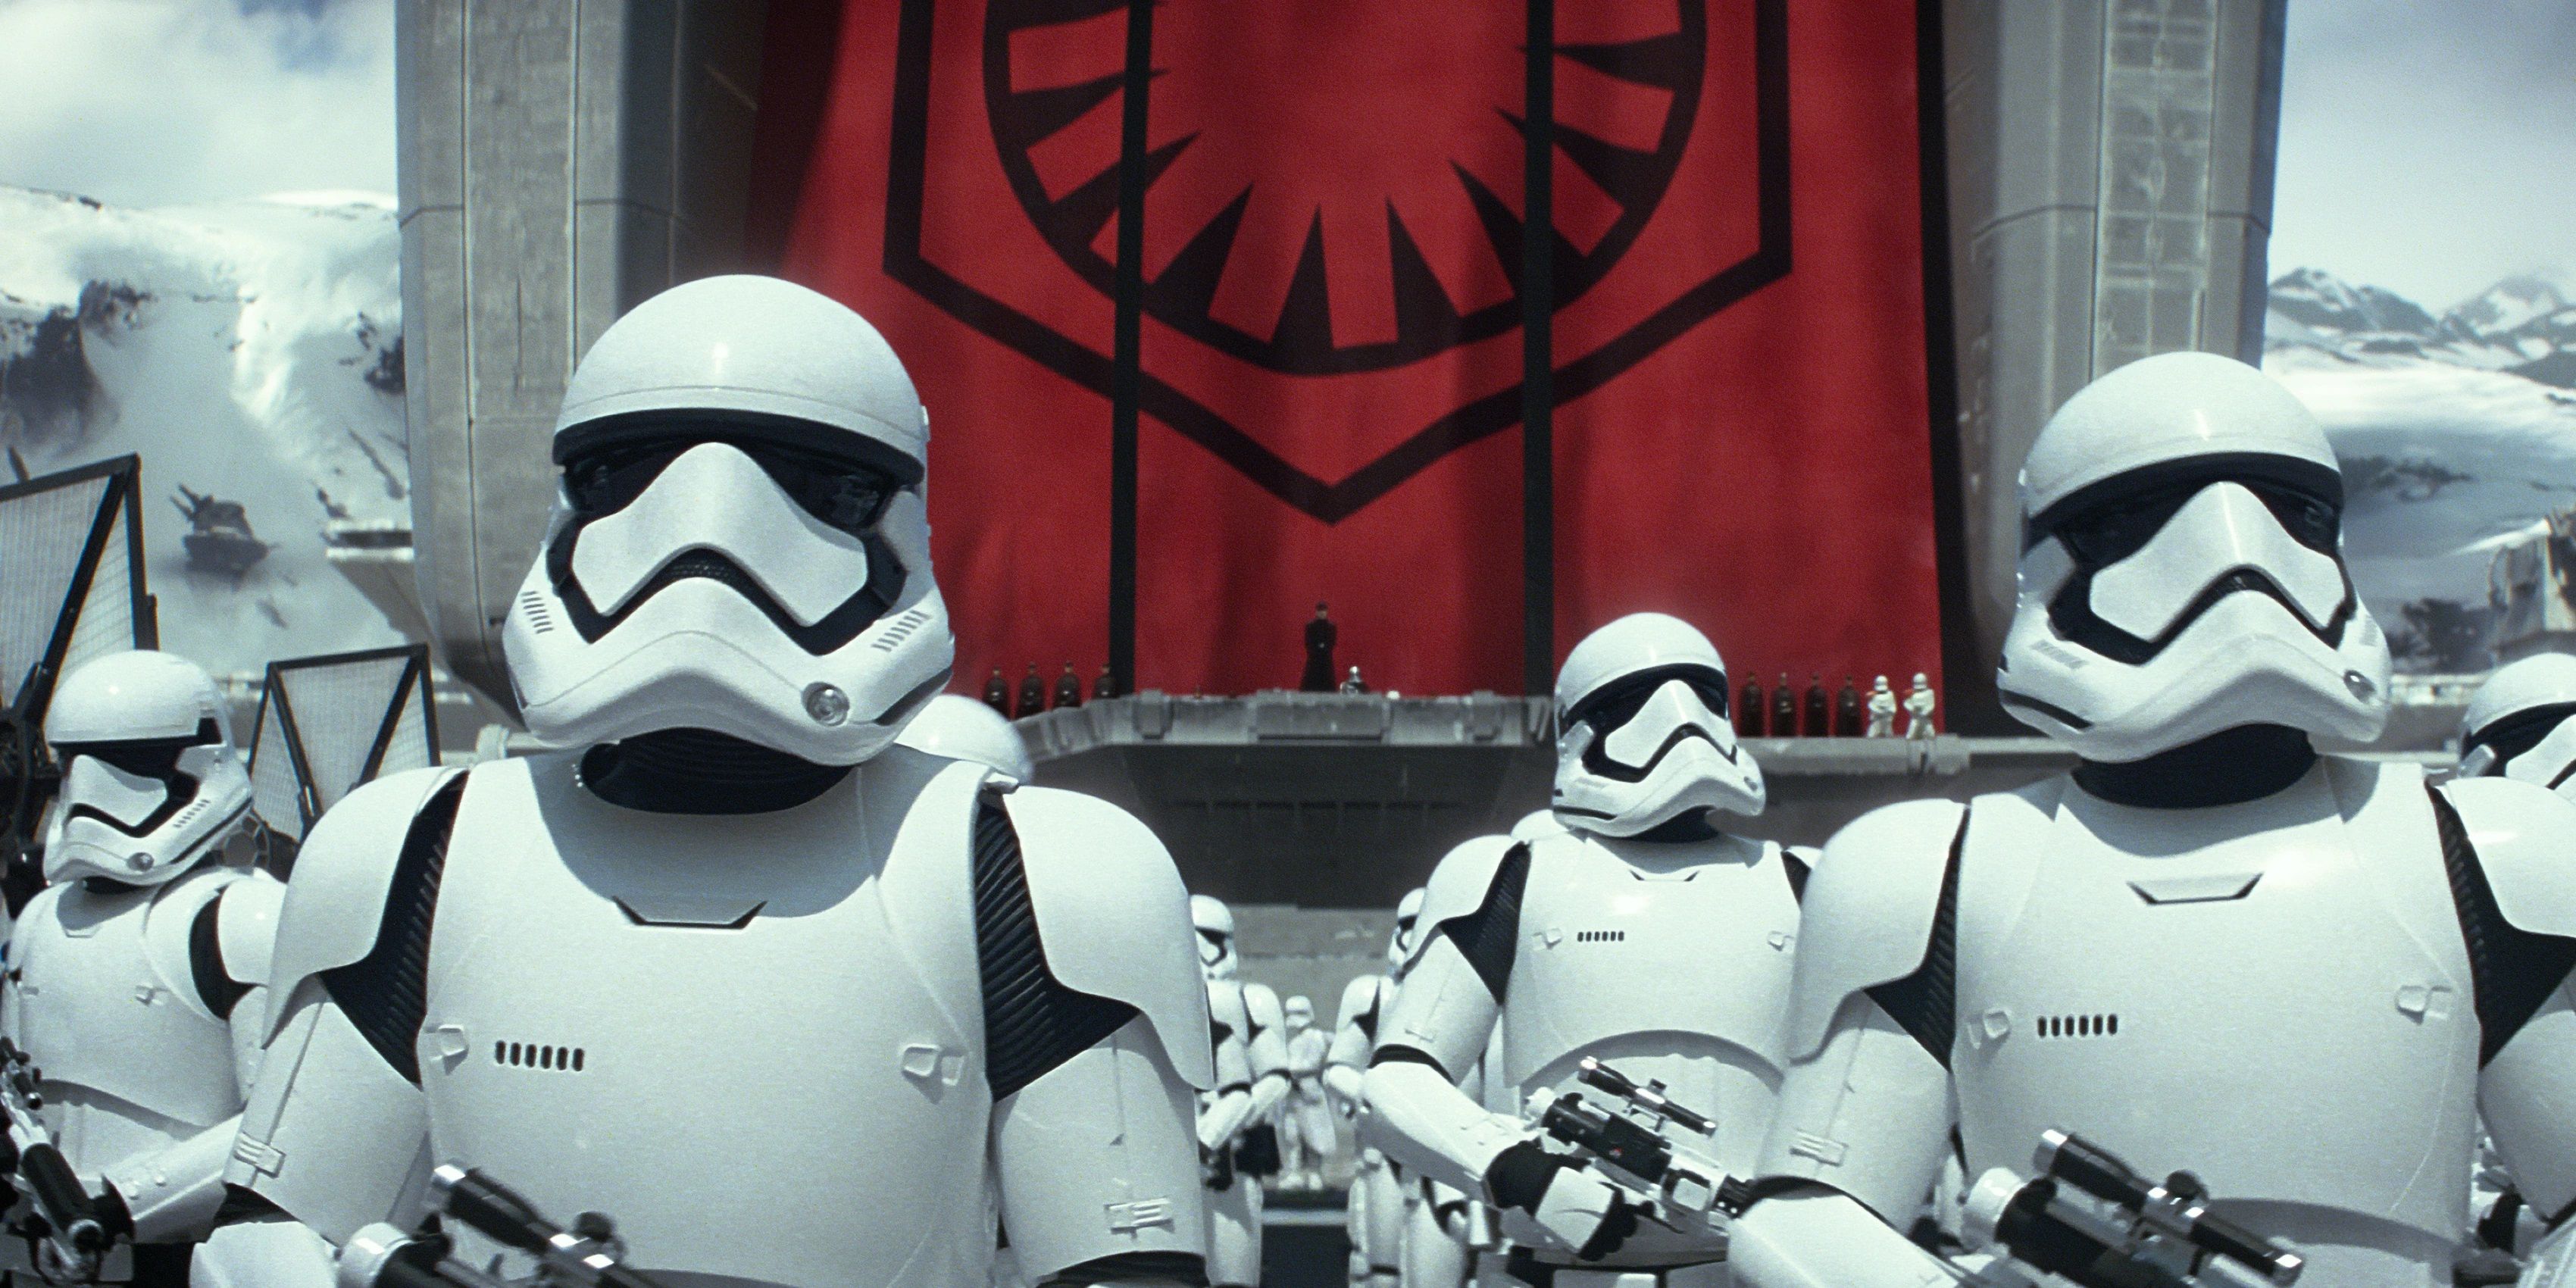 The First Order in The Force Awakens